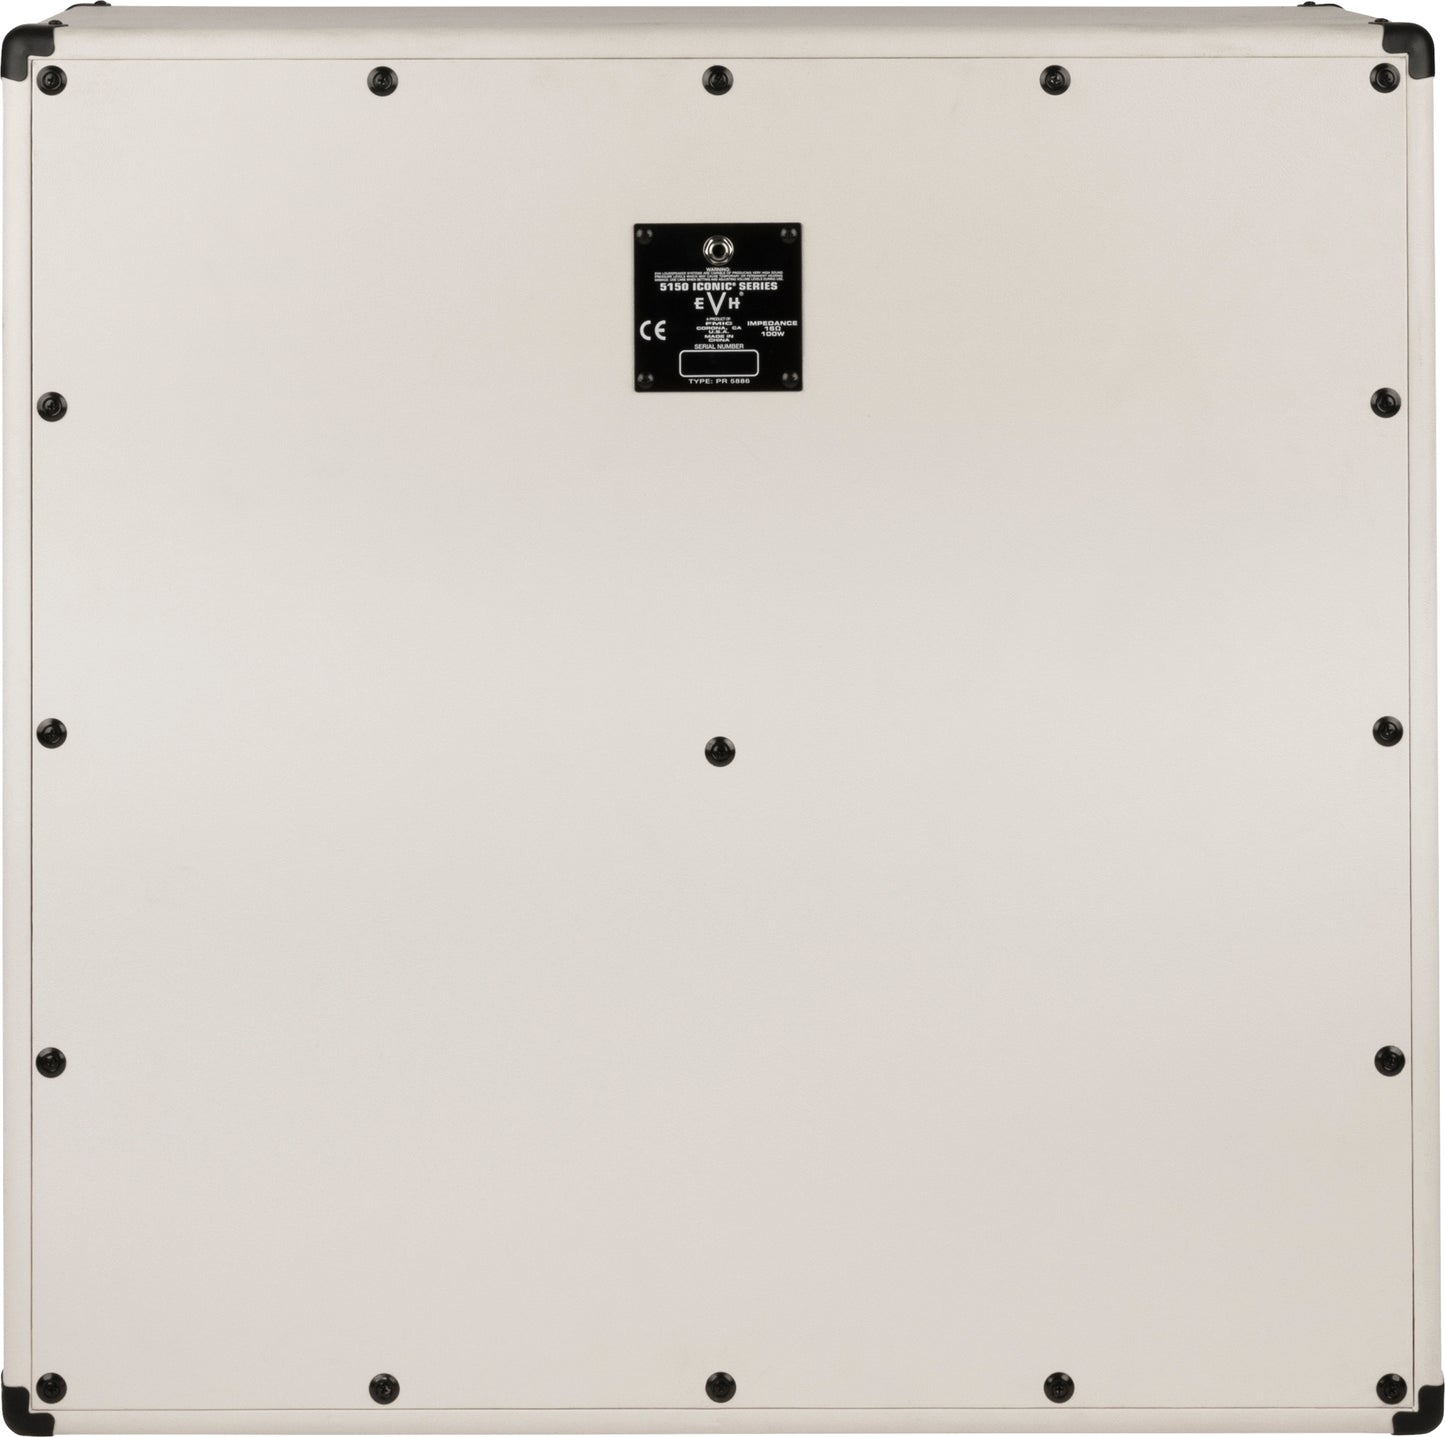 EVH 5150III® Iconic Series 4x12” Cabinet in Ivory